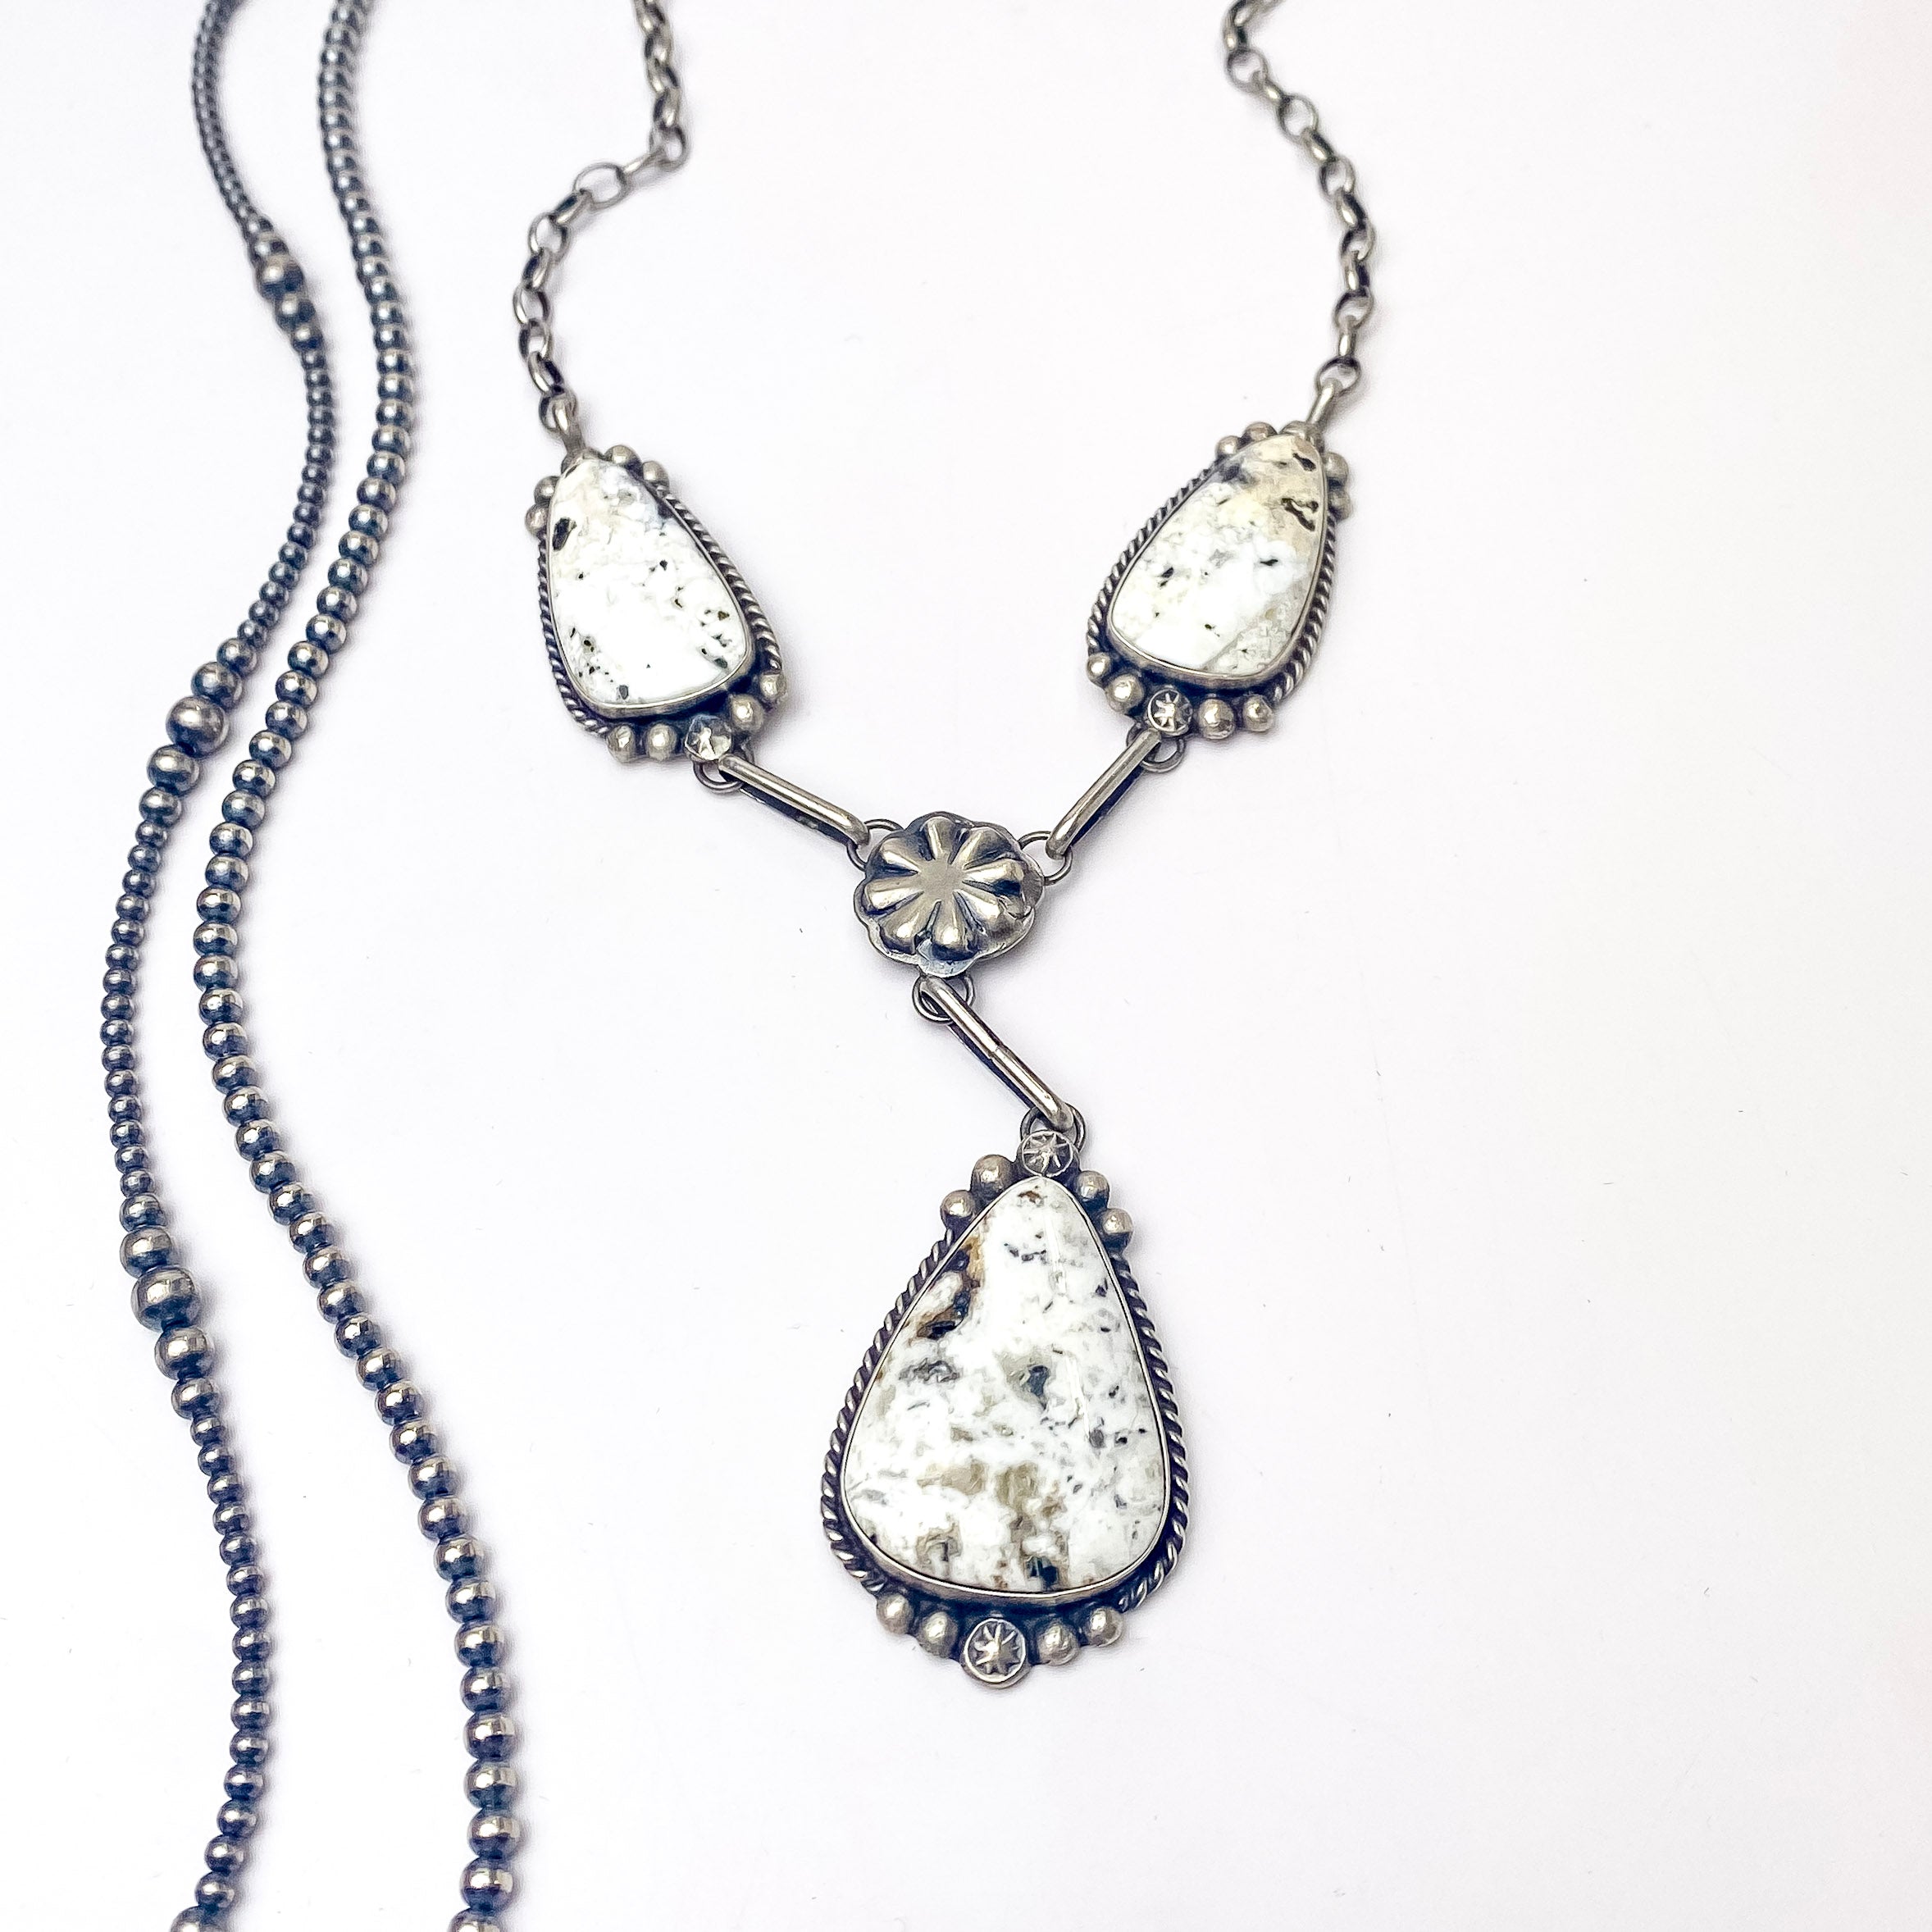 In the picture is a handmade augustine largo with sterling silver and white buffalo, this stunning necklace features drop triangle pendants and a flower middle with a white background